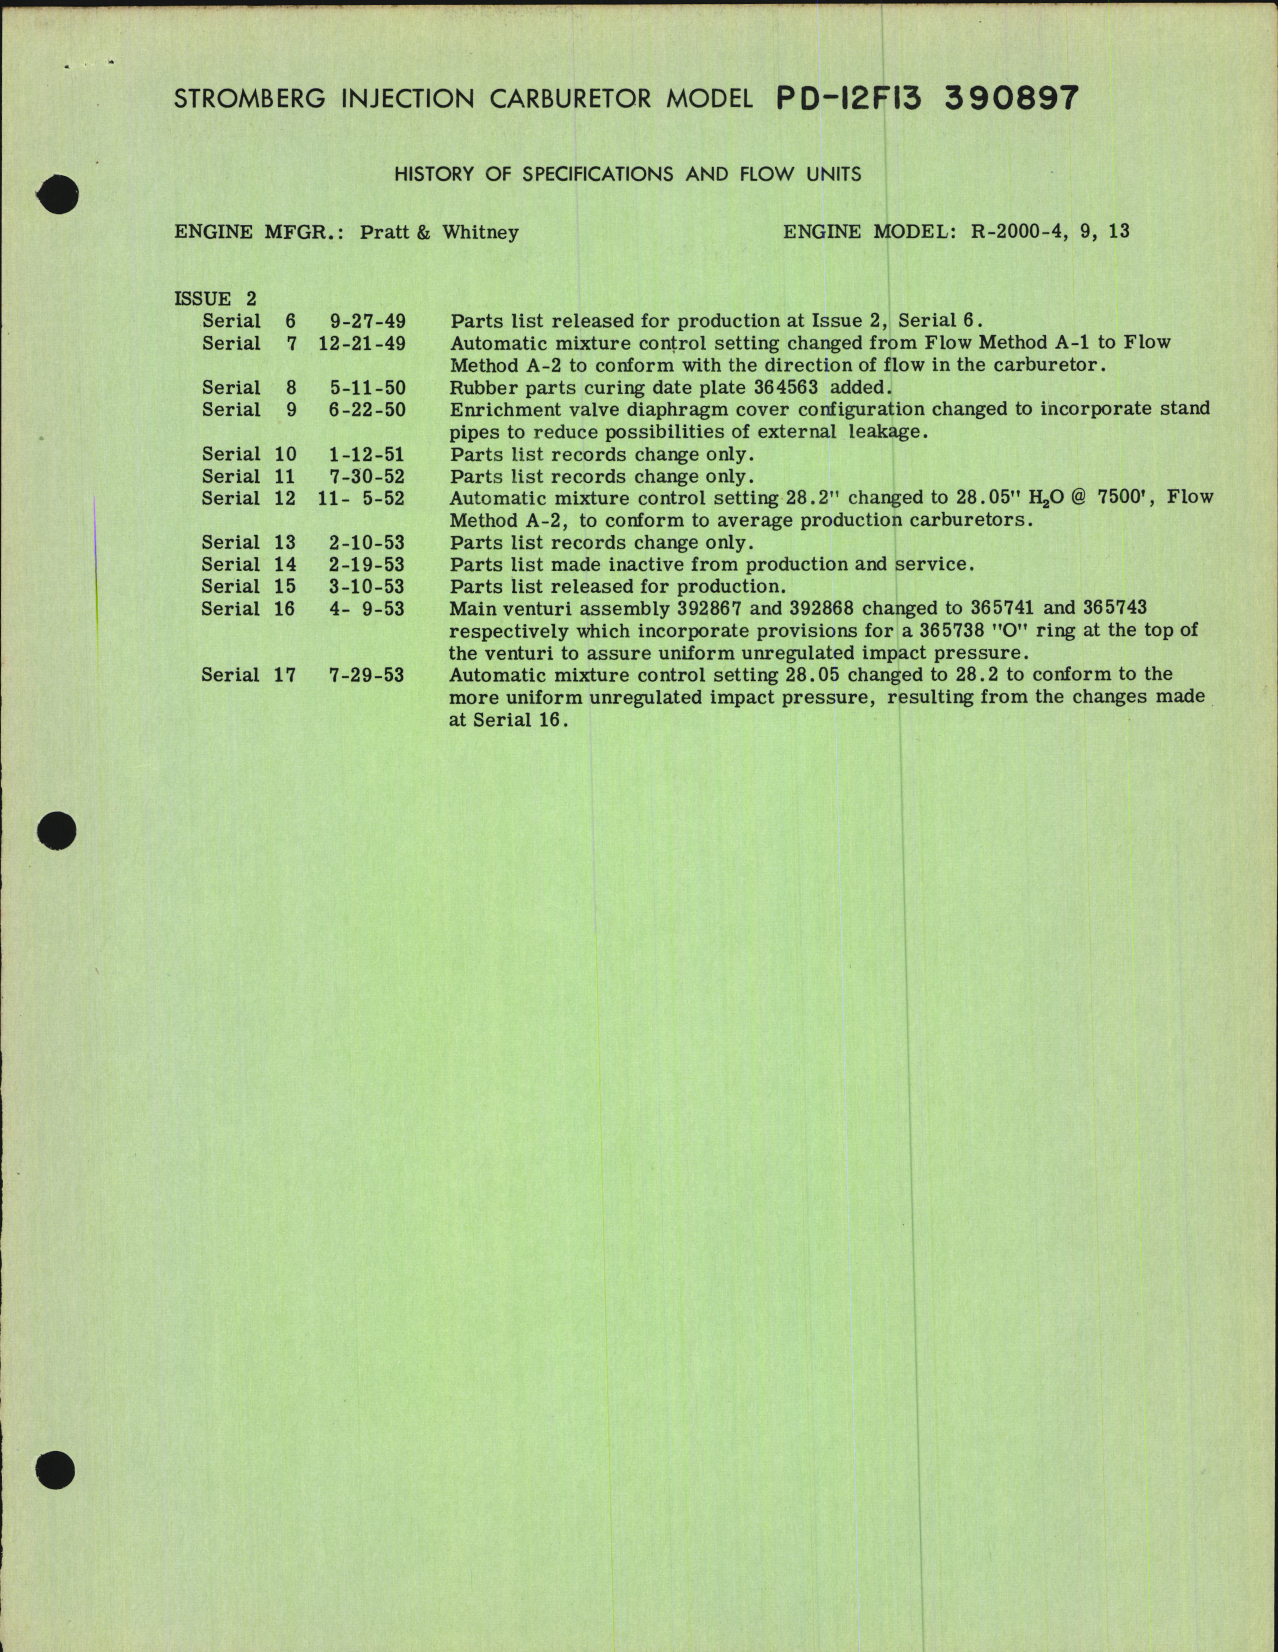 Sample page 6 from AirCorps Library document: Setting Specifications for Stromberg Injection Carburetor Model PD-12F13